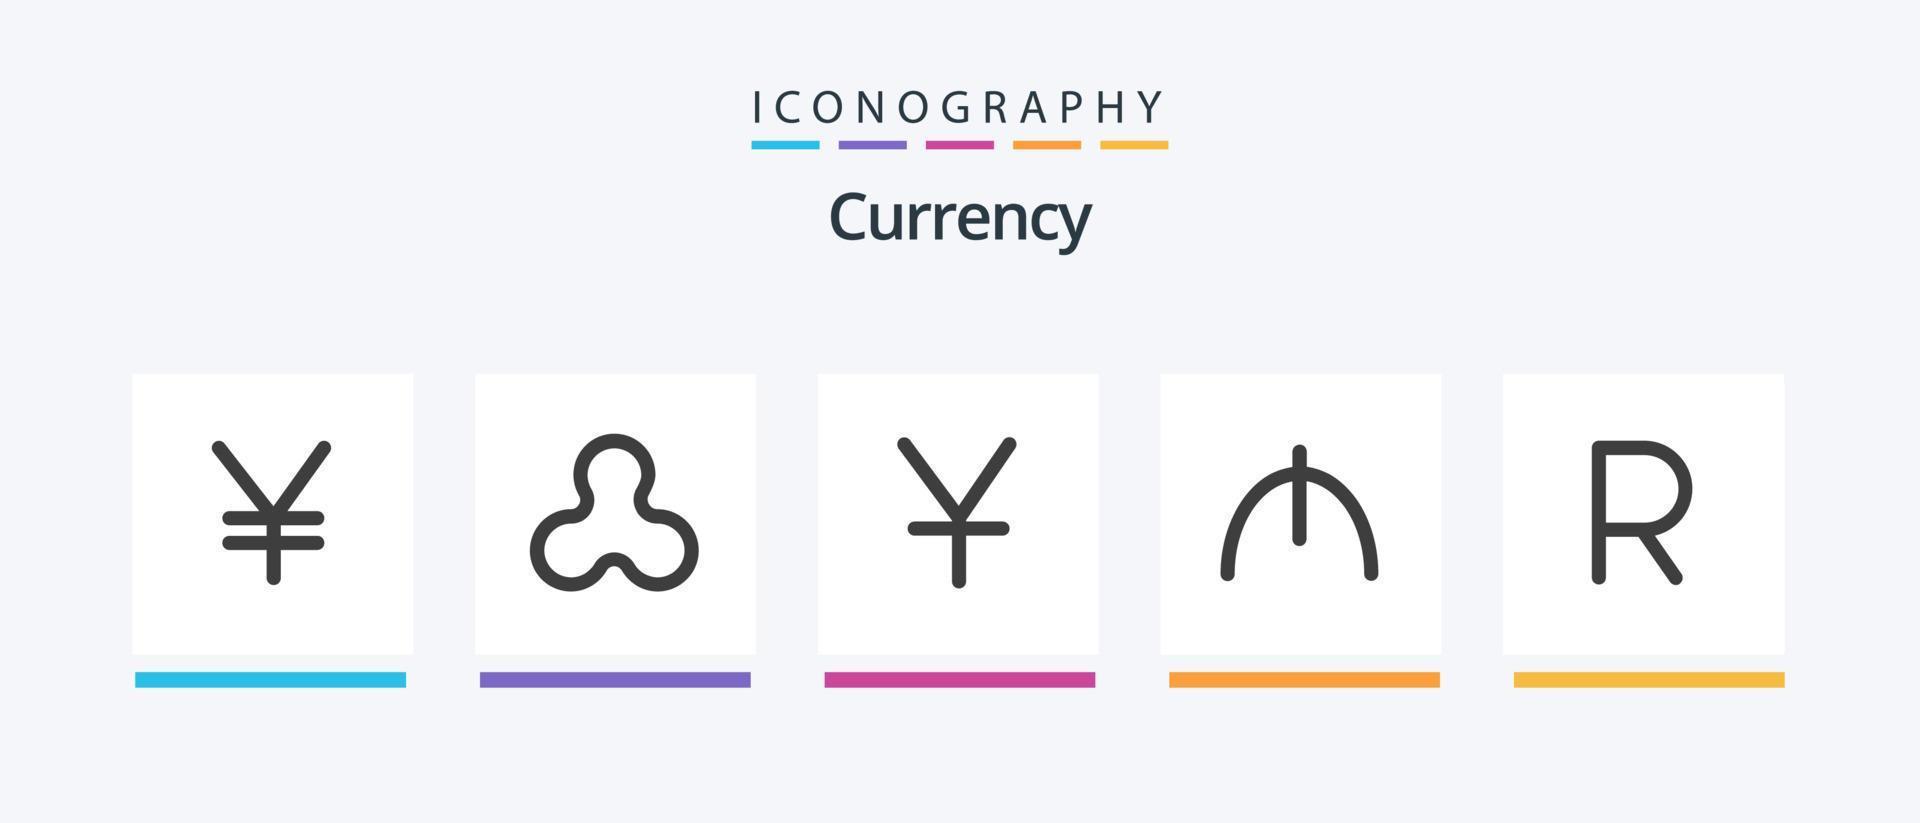 Currency Flat 5 Icon Pack Including . zar. yen. currency. rand. Creative Icons Design vector